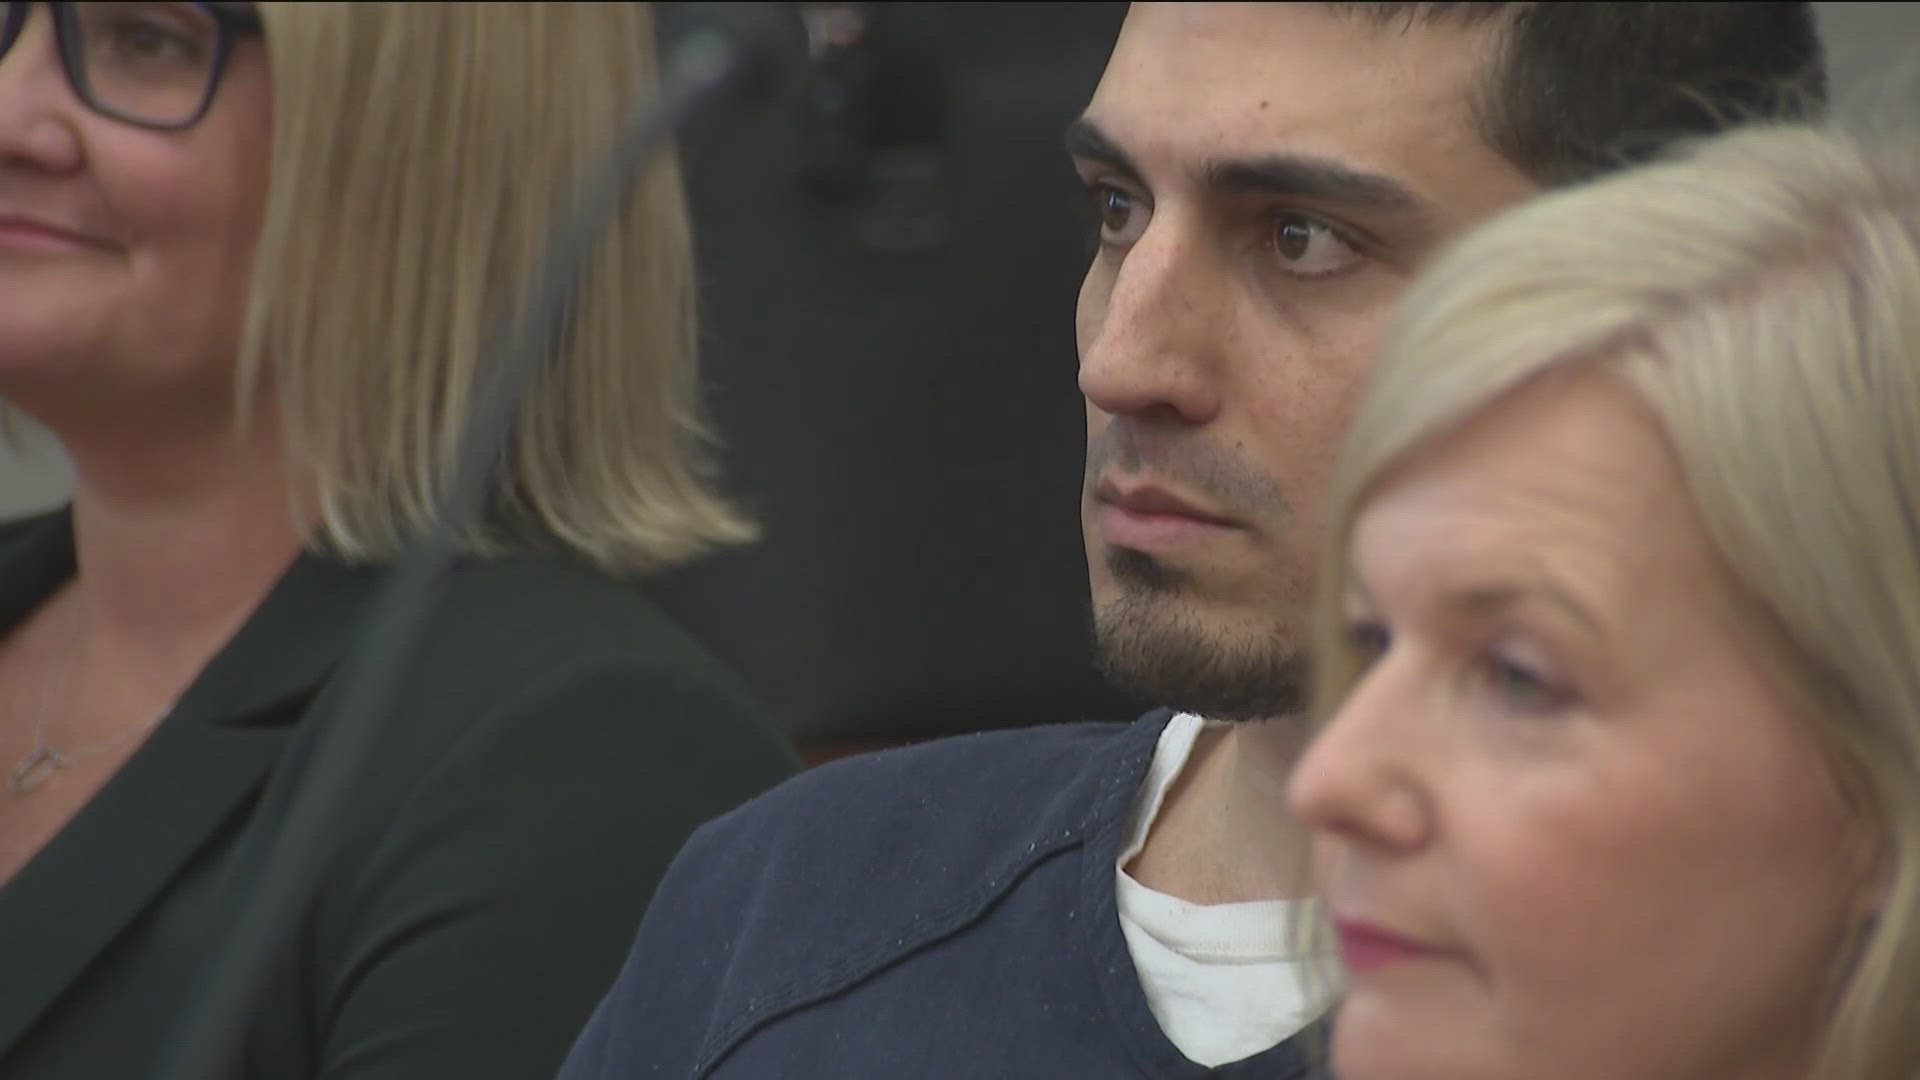 Ali Abulaban faces life in prison without the possibility of parole. His public defender told the judge she will be filing an appeal in this case.